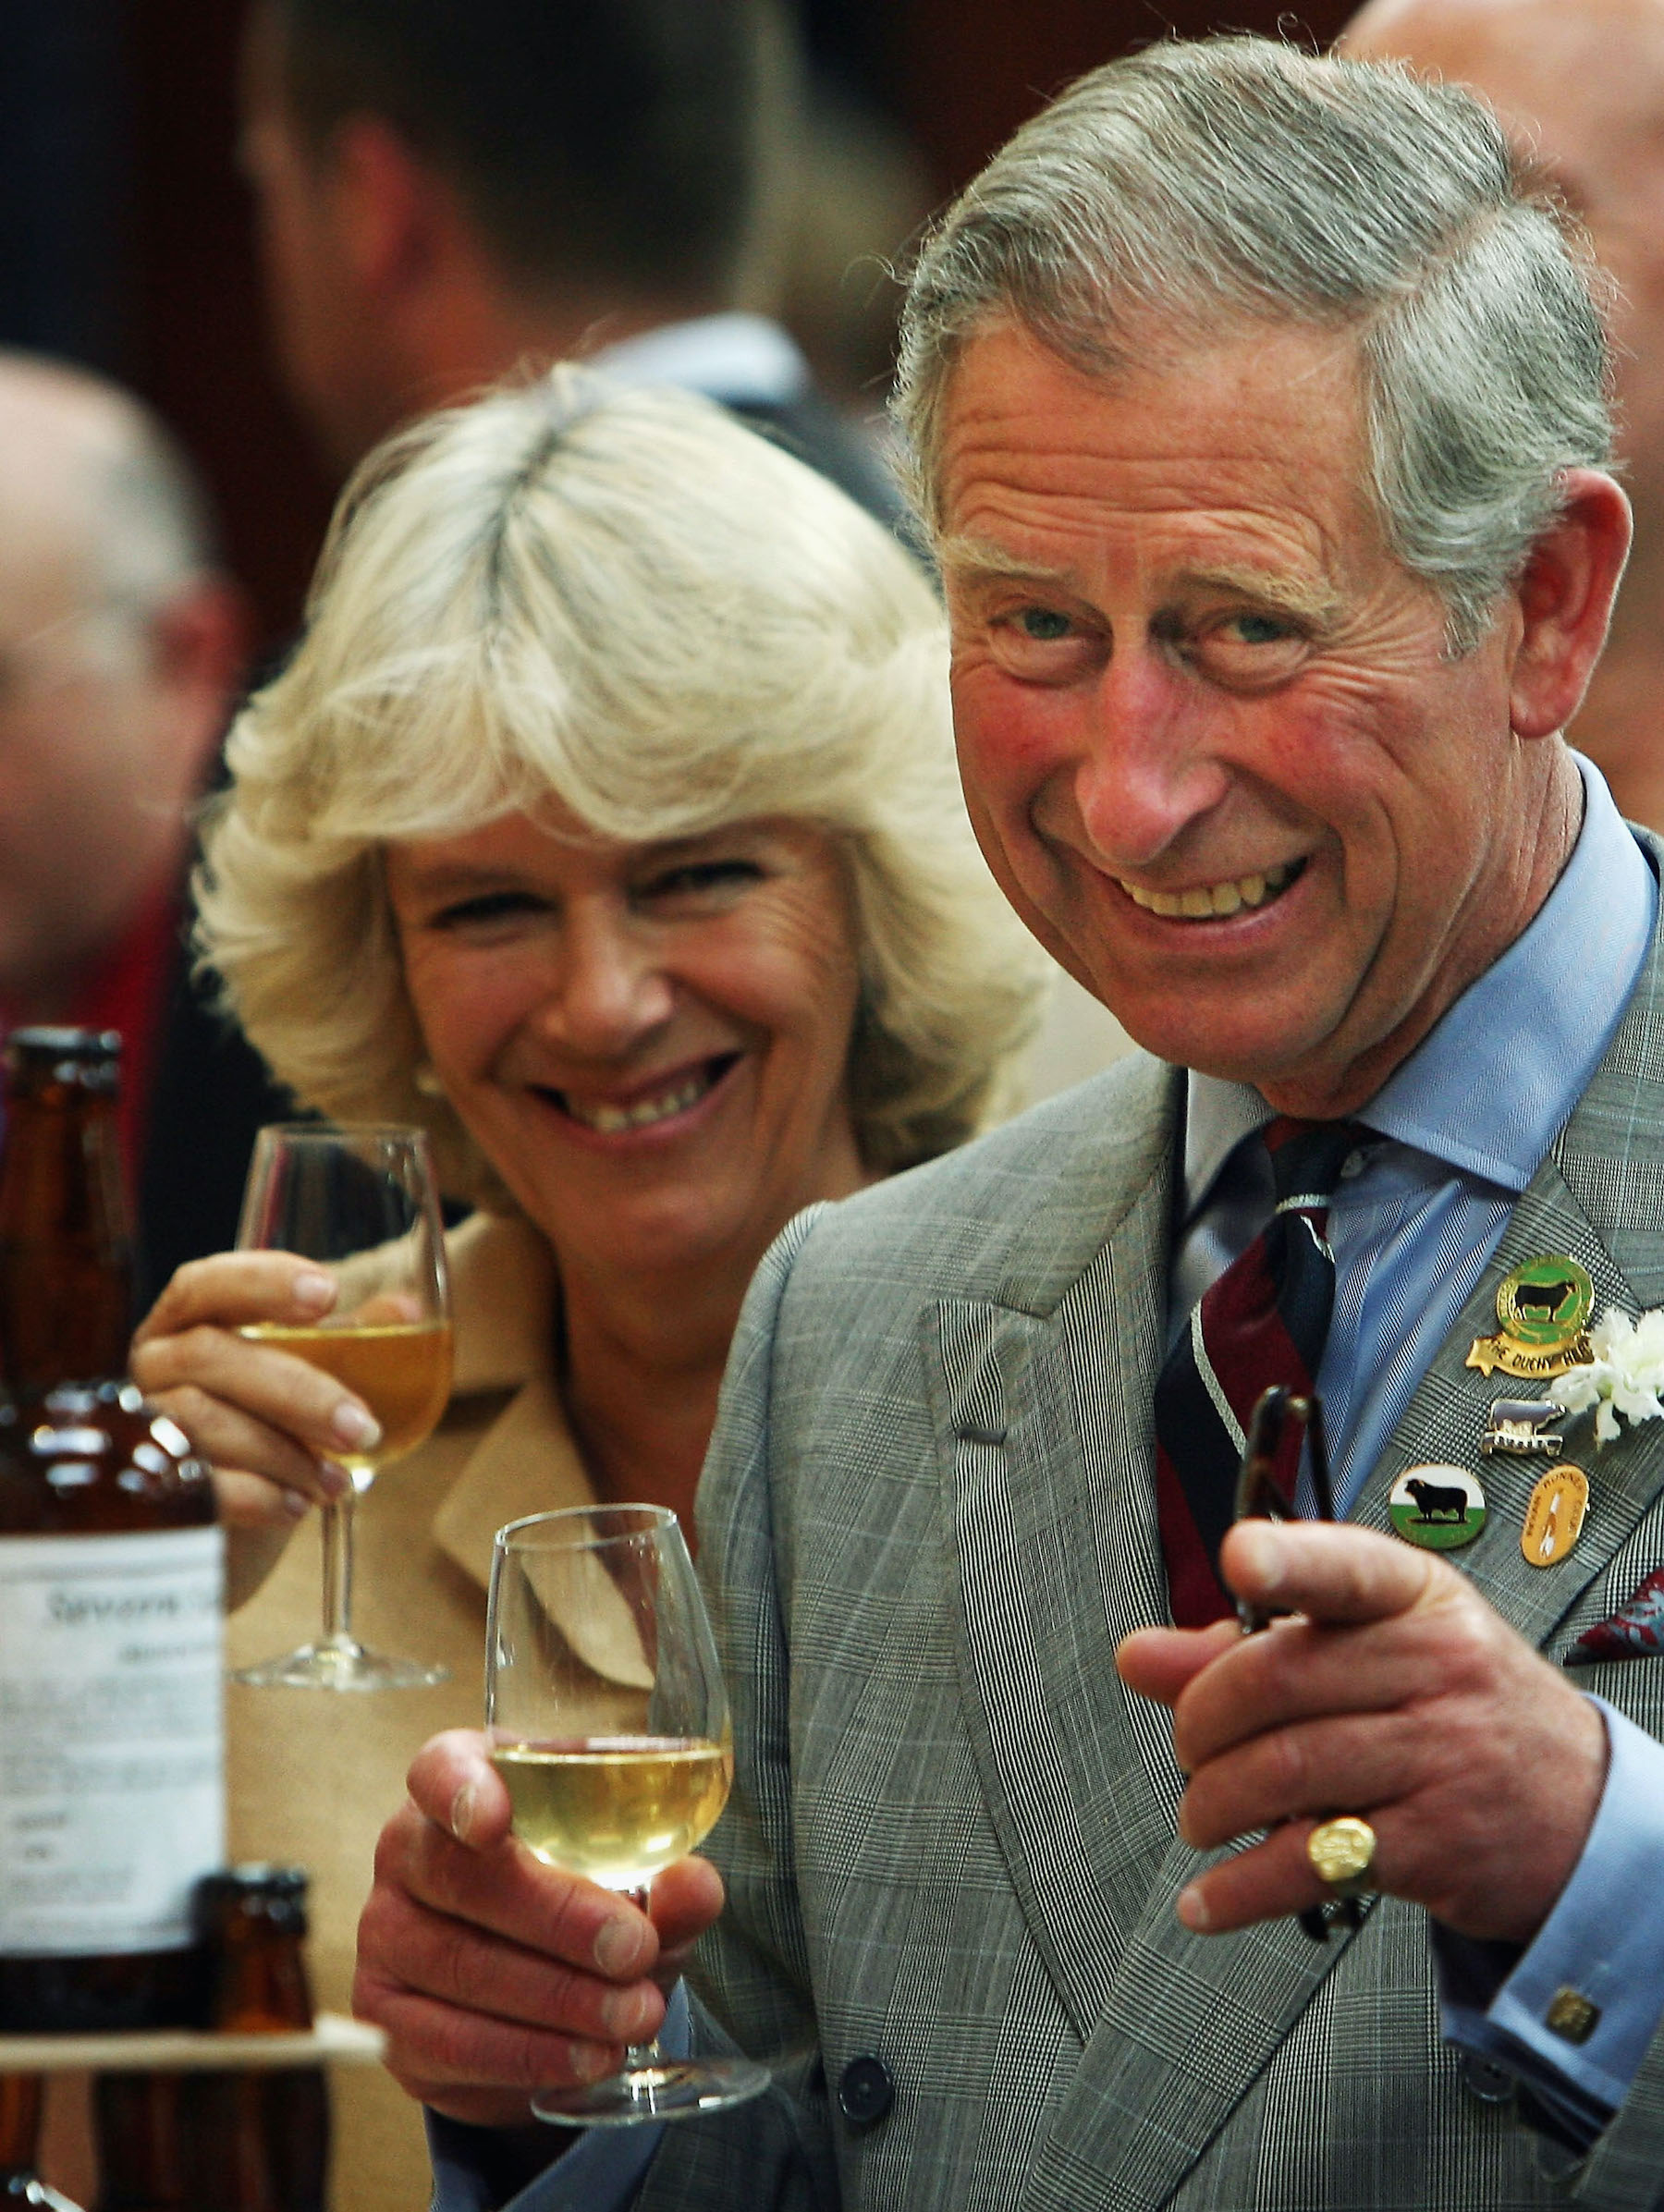 Prince Charles and Camilla Parker Bowles drink wine at an agricultural show